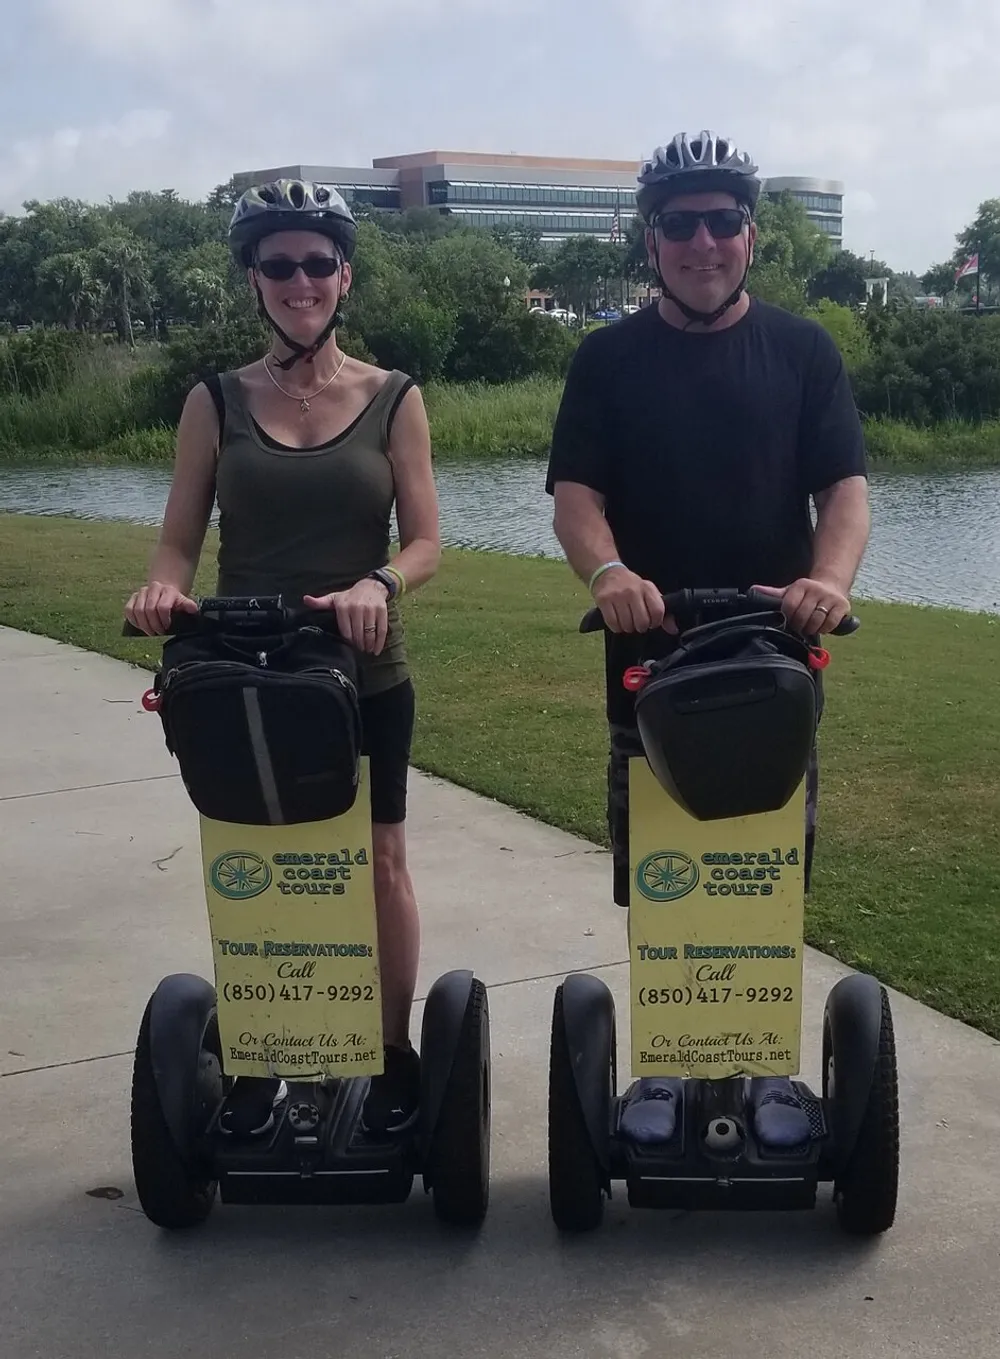 Two people are wearing helmets and smiling while standing on Segway personal transporters in a park-like setting